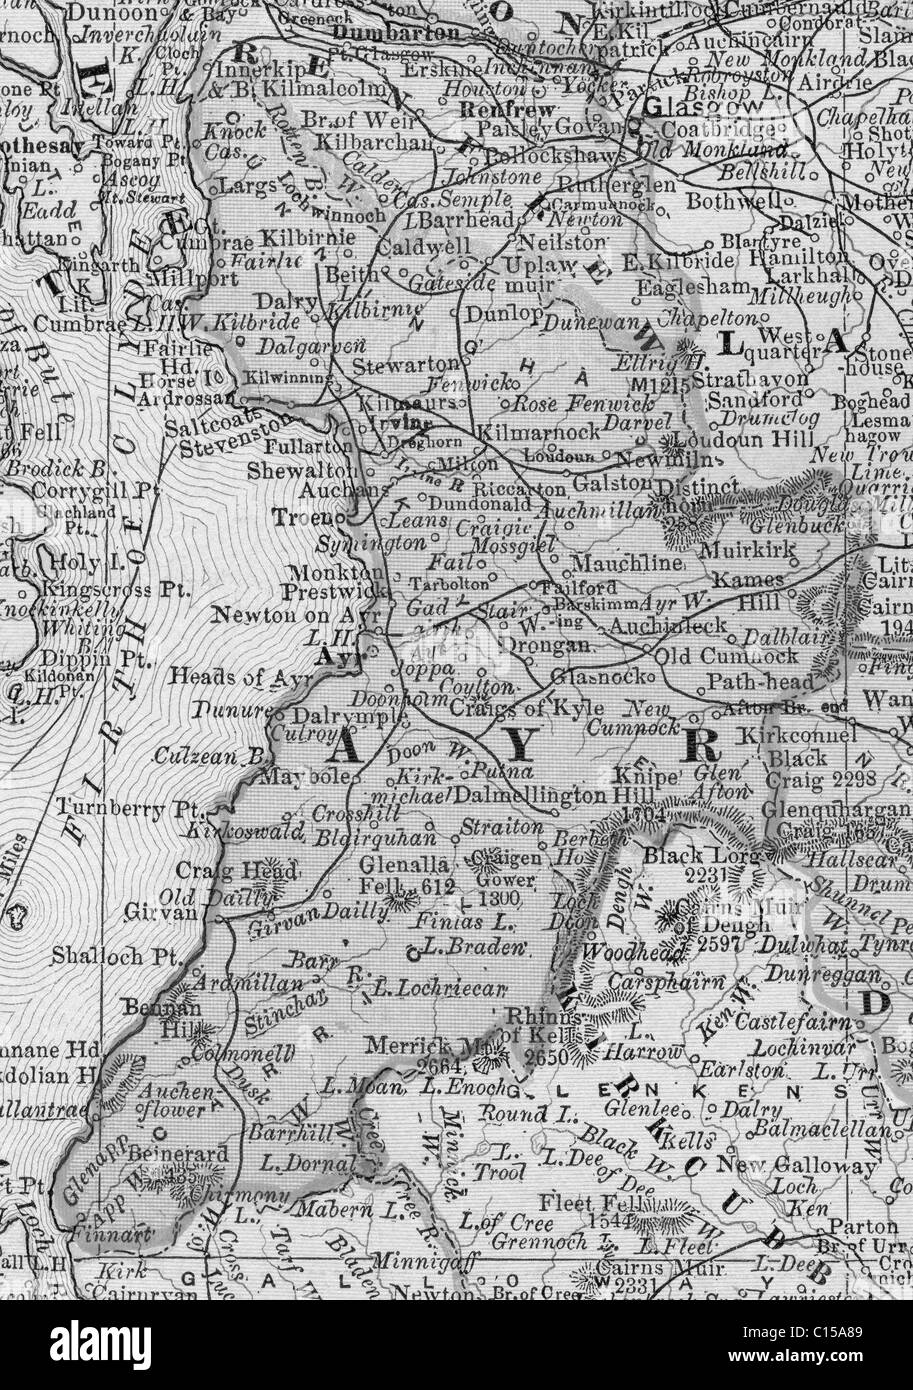 Old map of Ayr County from original geography textbook, 1884 Stock Photo